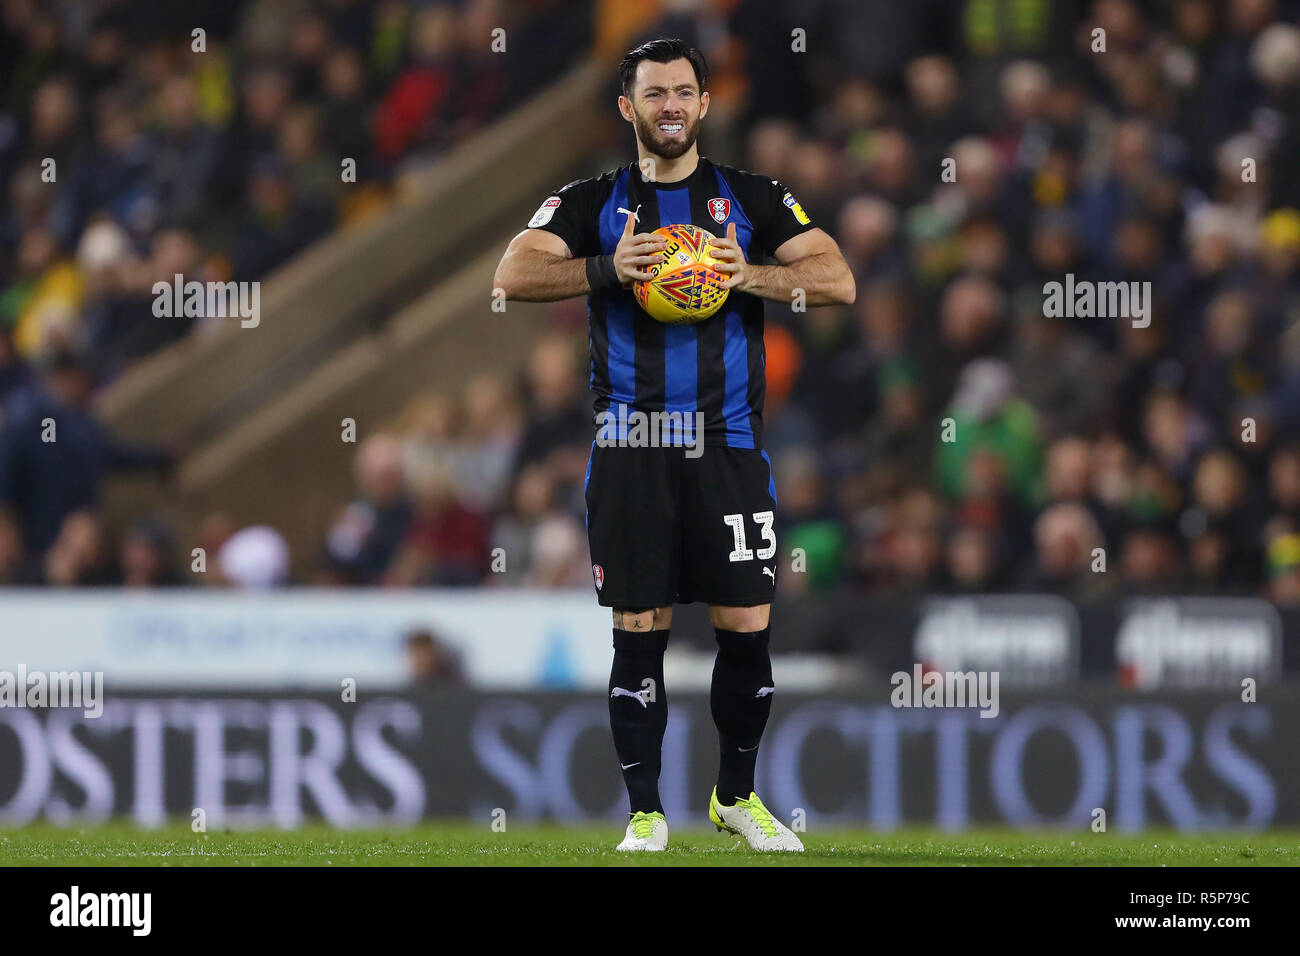 Norwich, UK. 1st December, 2018. Richie Towell of Rotherham United - Norwich City v Rotherham United, Sky Bet Championship, Carrow Road, Norwich - 1st December 2018  Editorial Use Only - DataCo restrictions apply Credit: MatchDay Images Limited/Alamy Live News Stock Photo